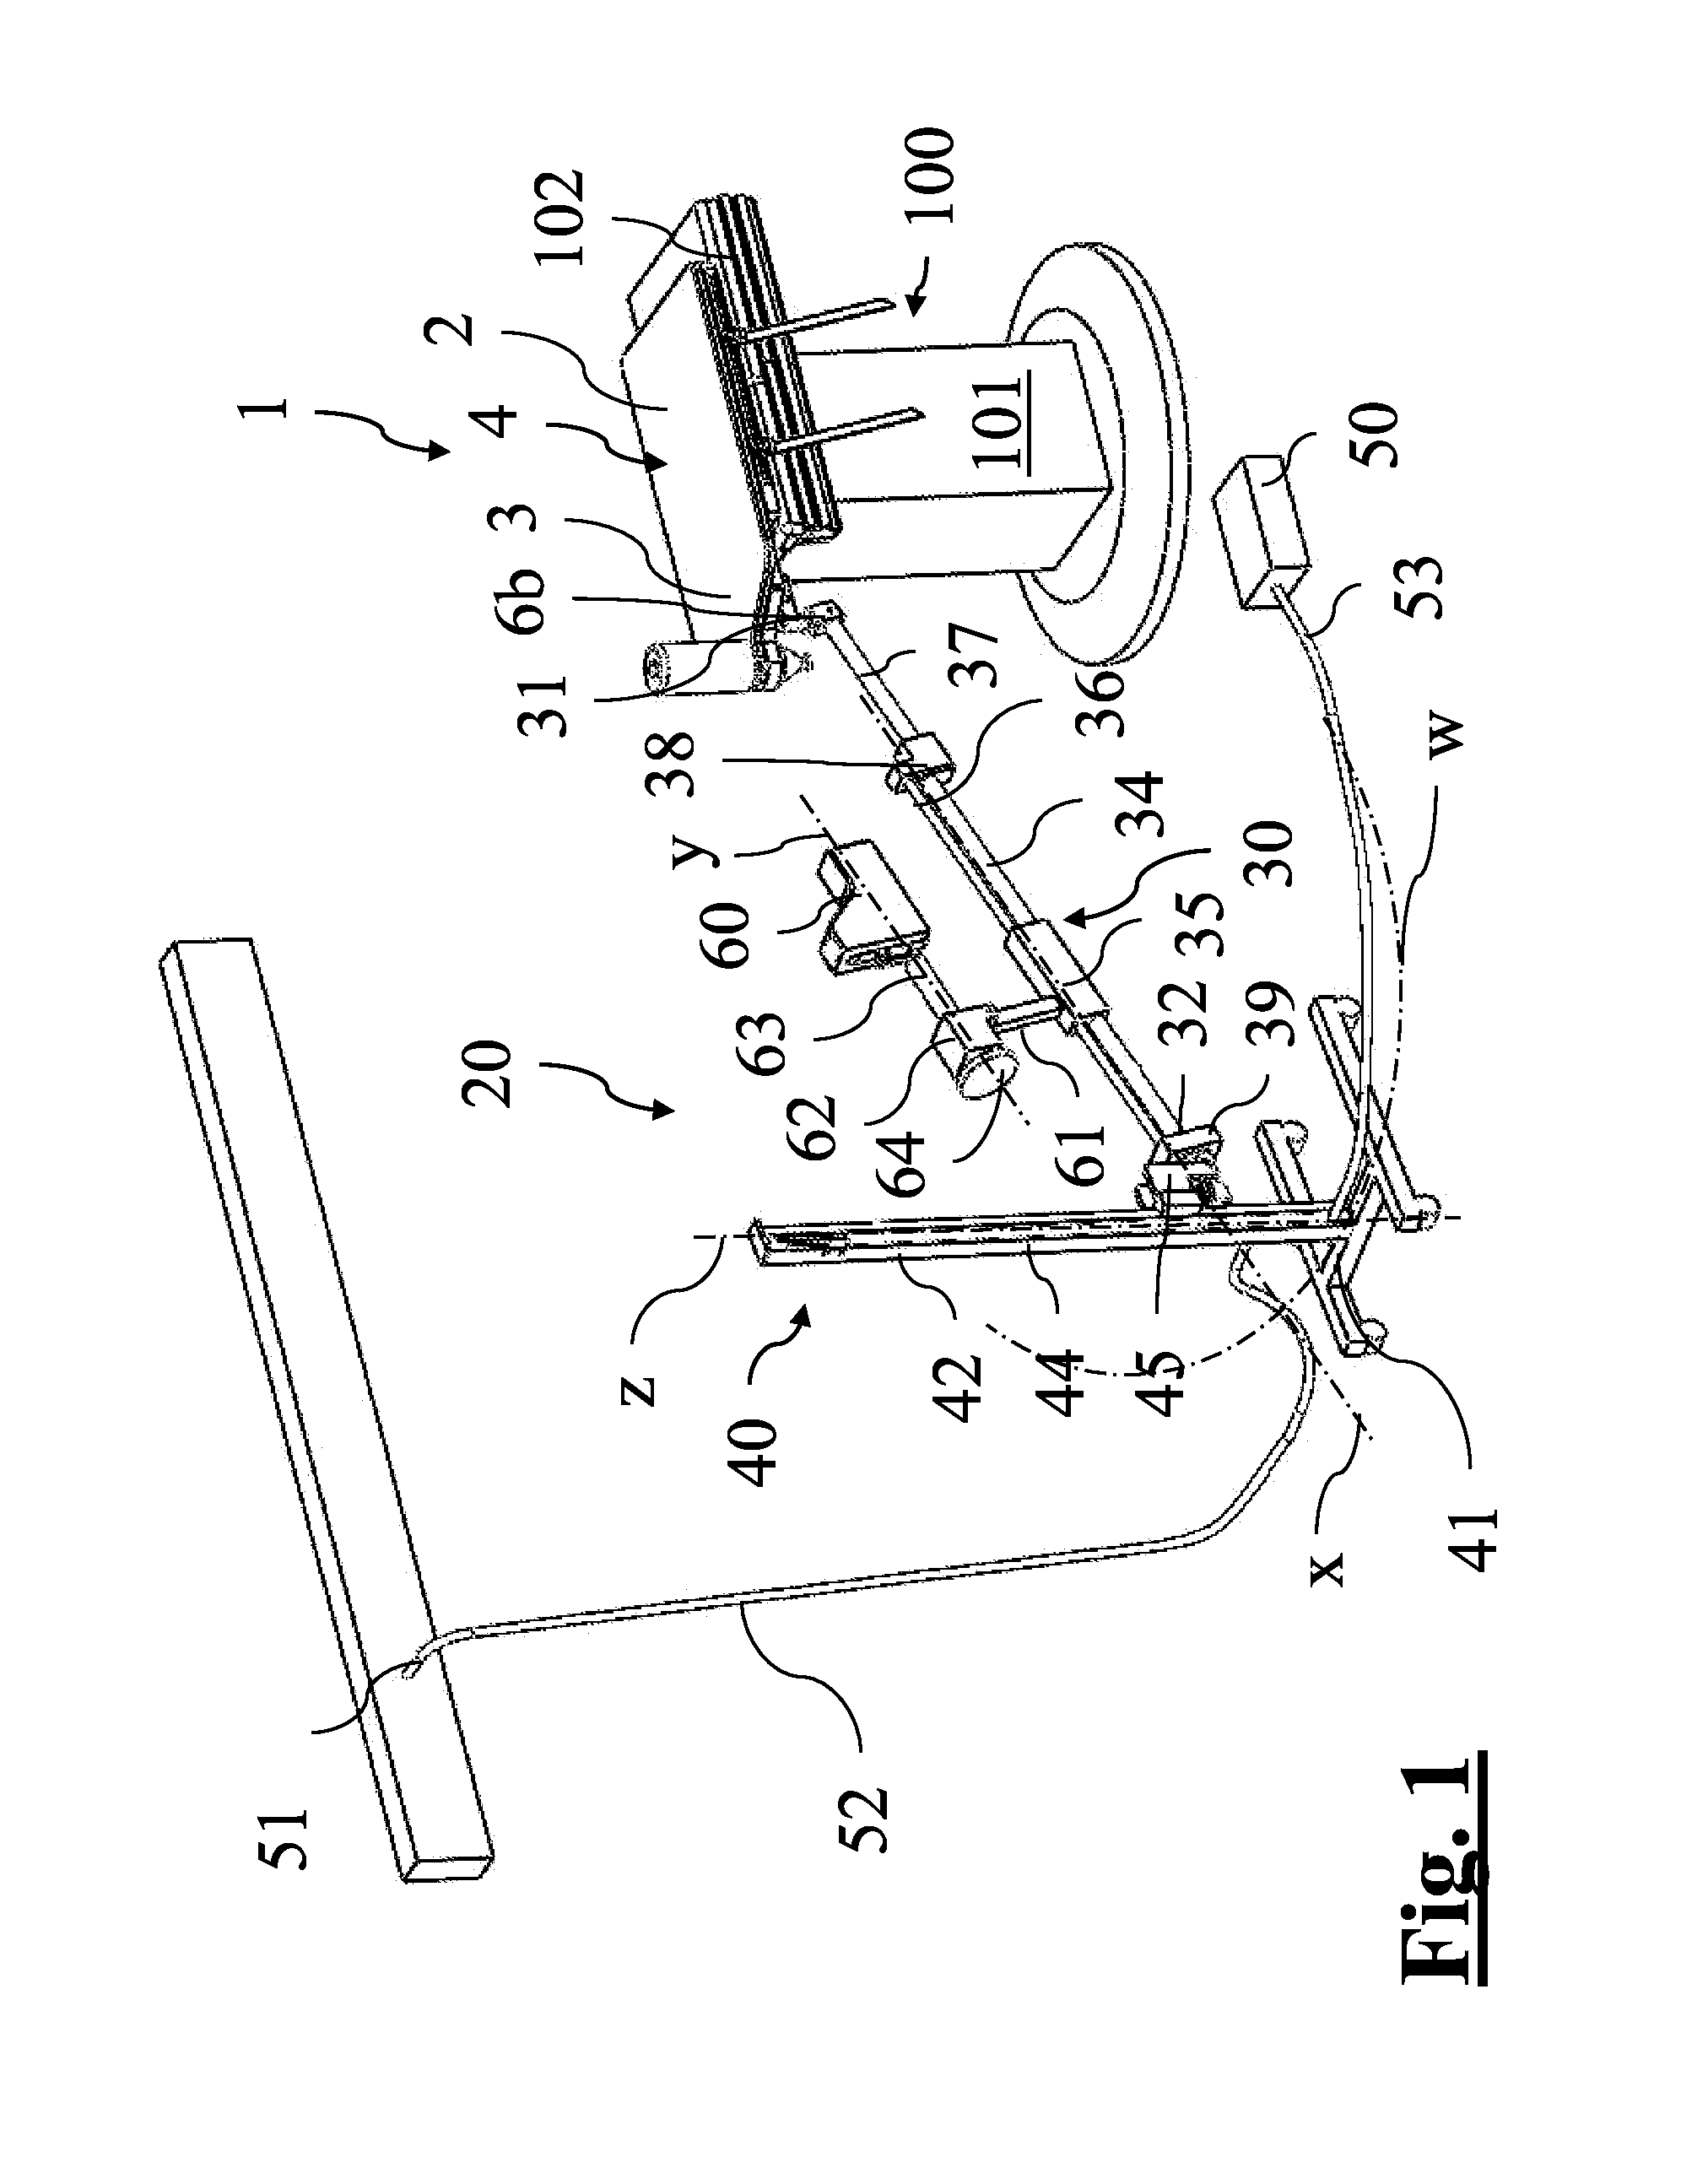 Apparatus for positioning the lower limb of a patient during operation, in particular for hip replacement operations with anterior approach, and surgical positioning system comprising said apparatus